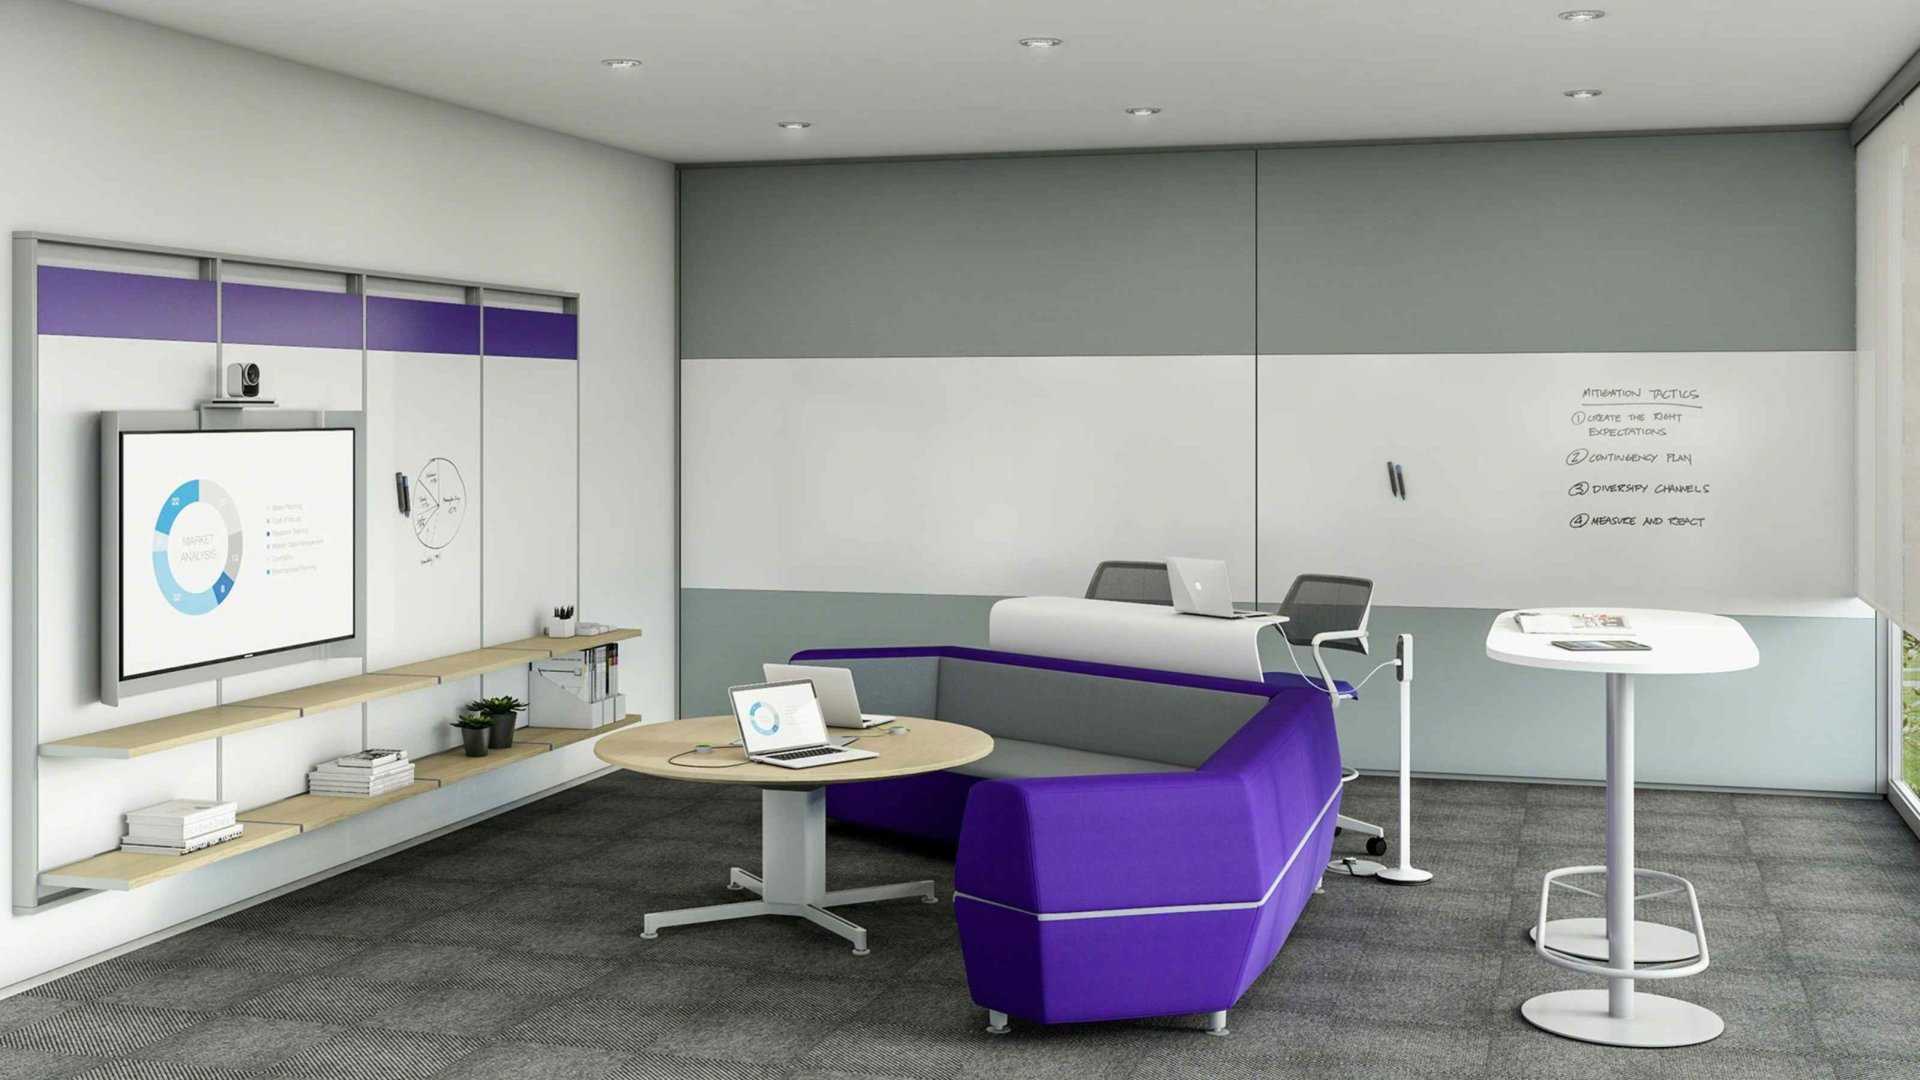 Steelcase - Media Scape Lounge - Lounge Seating - 04